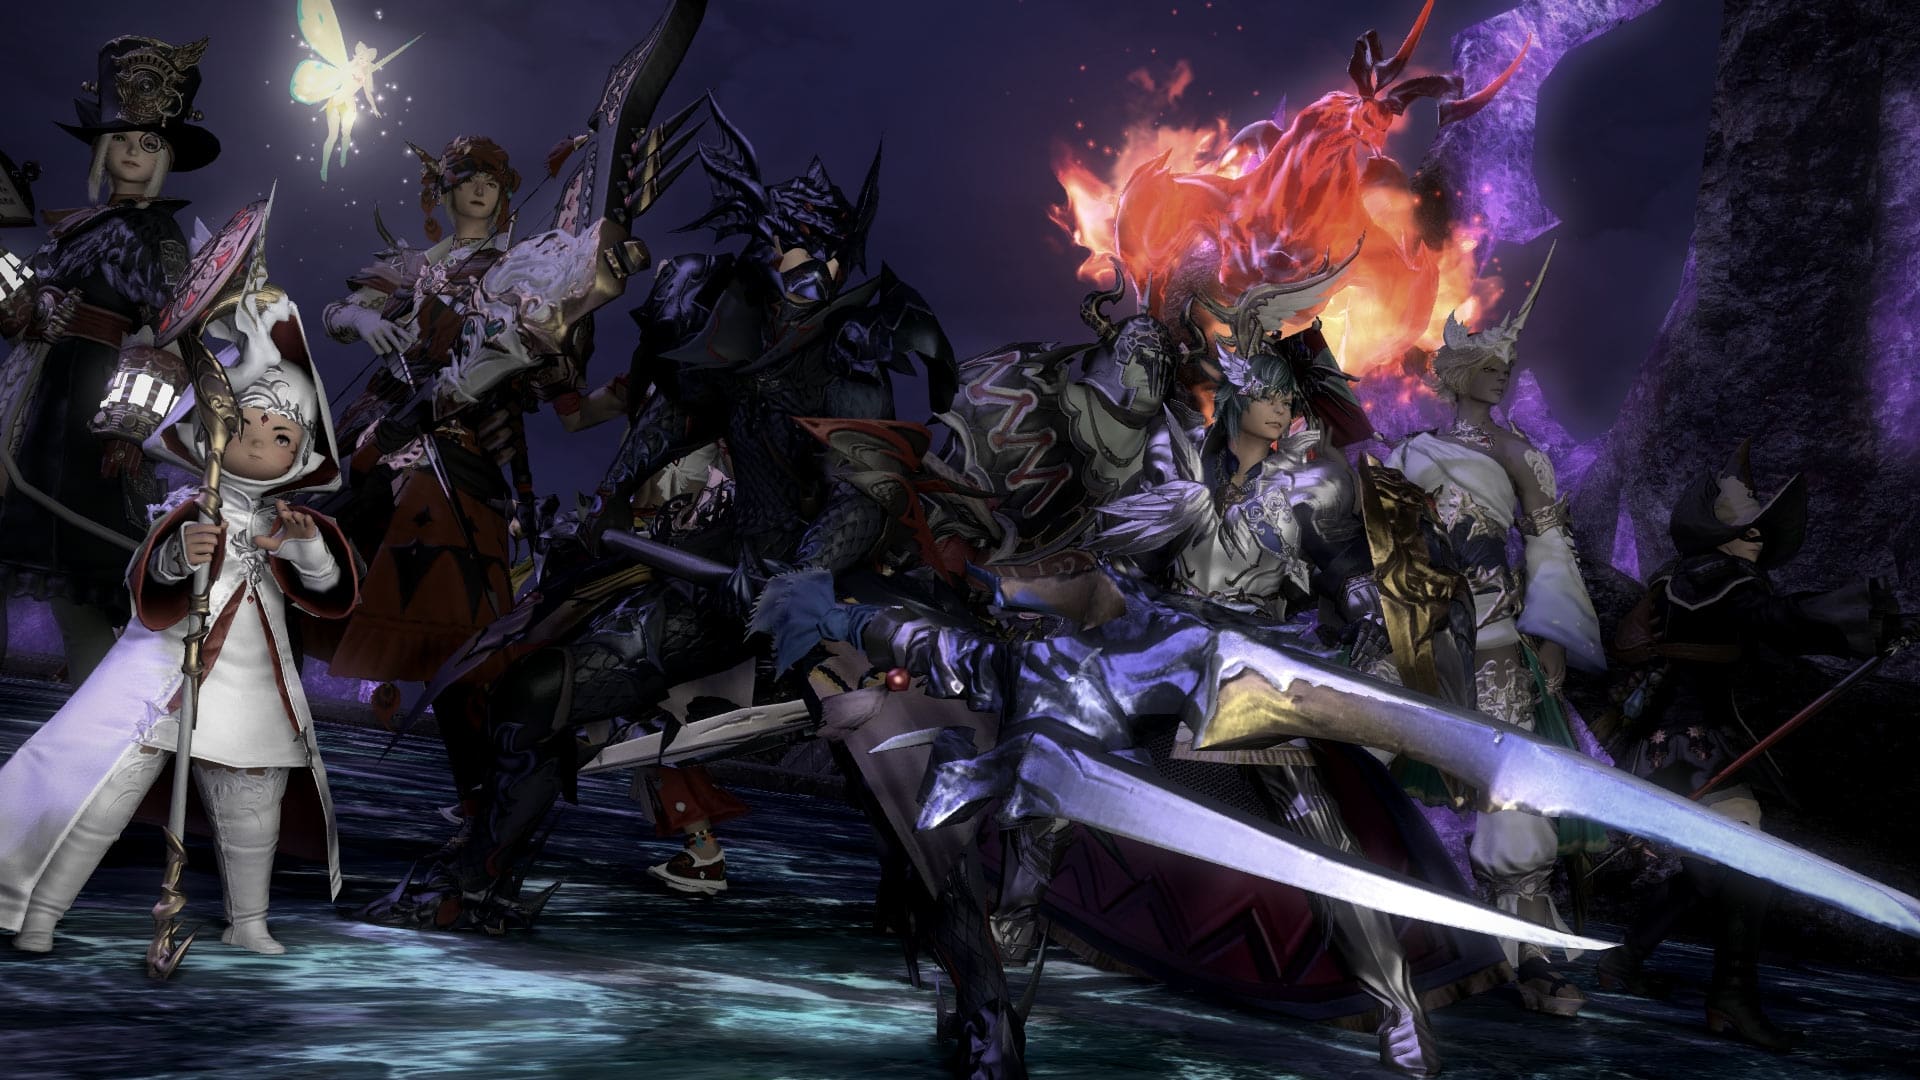 Final Fantasy Xiv Free Trial Extended To Heavensward More Options Level Cap Increased To 60 Gayming Magazine